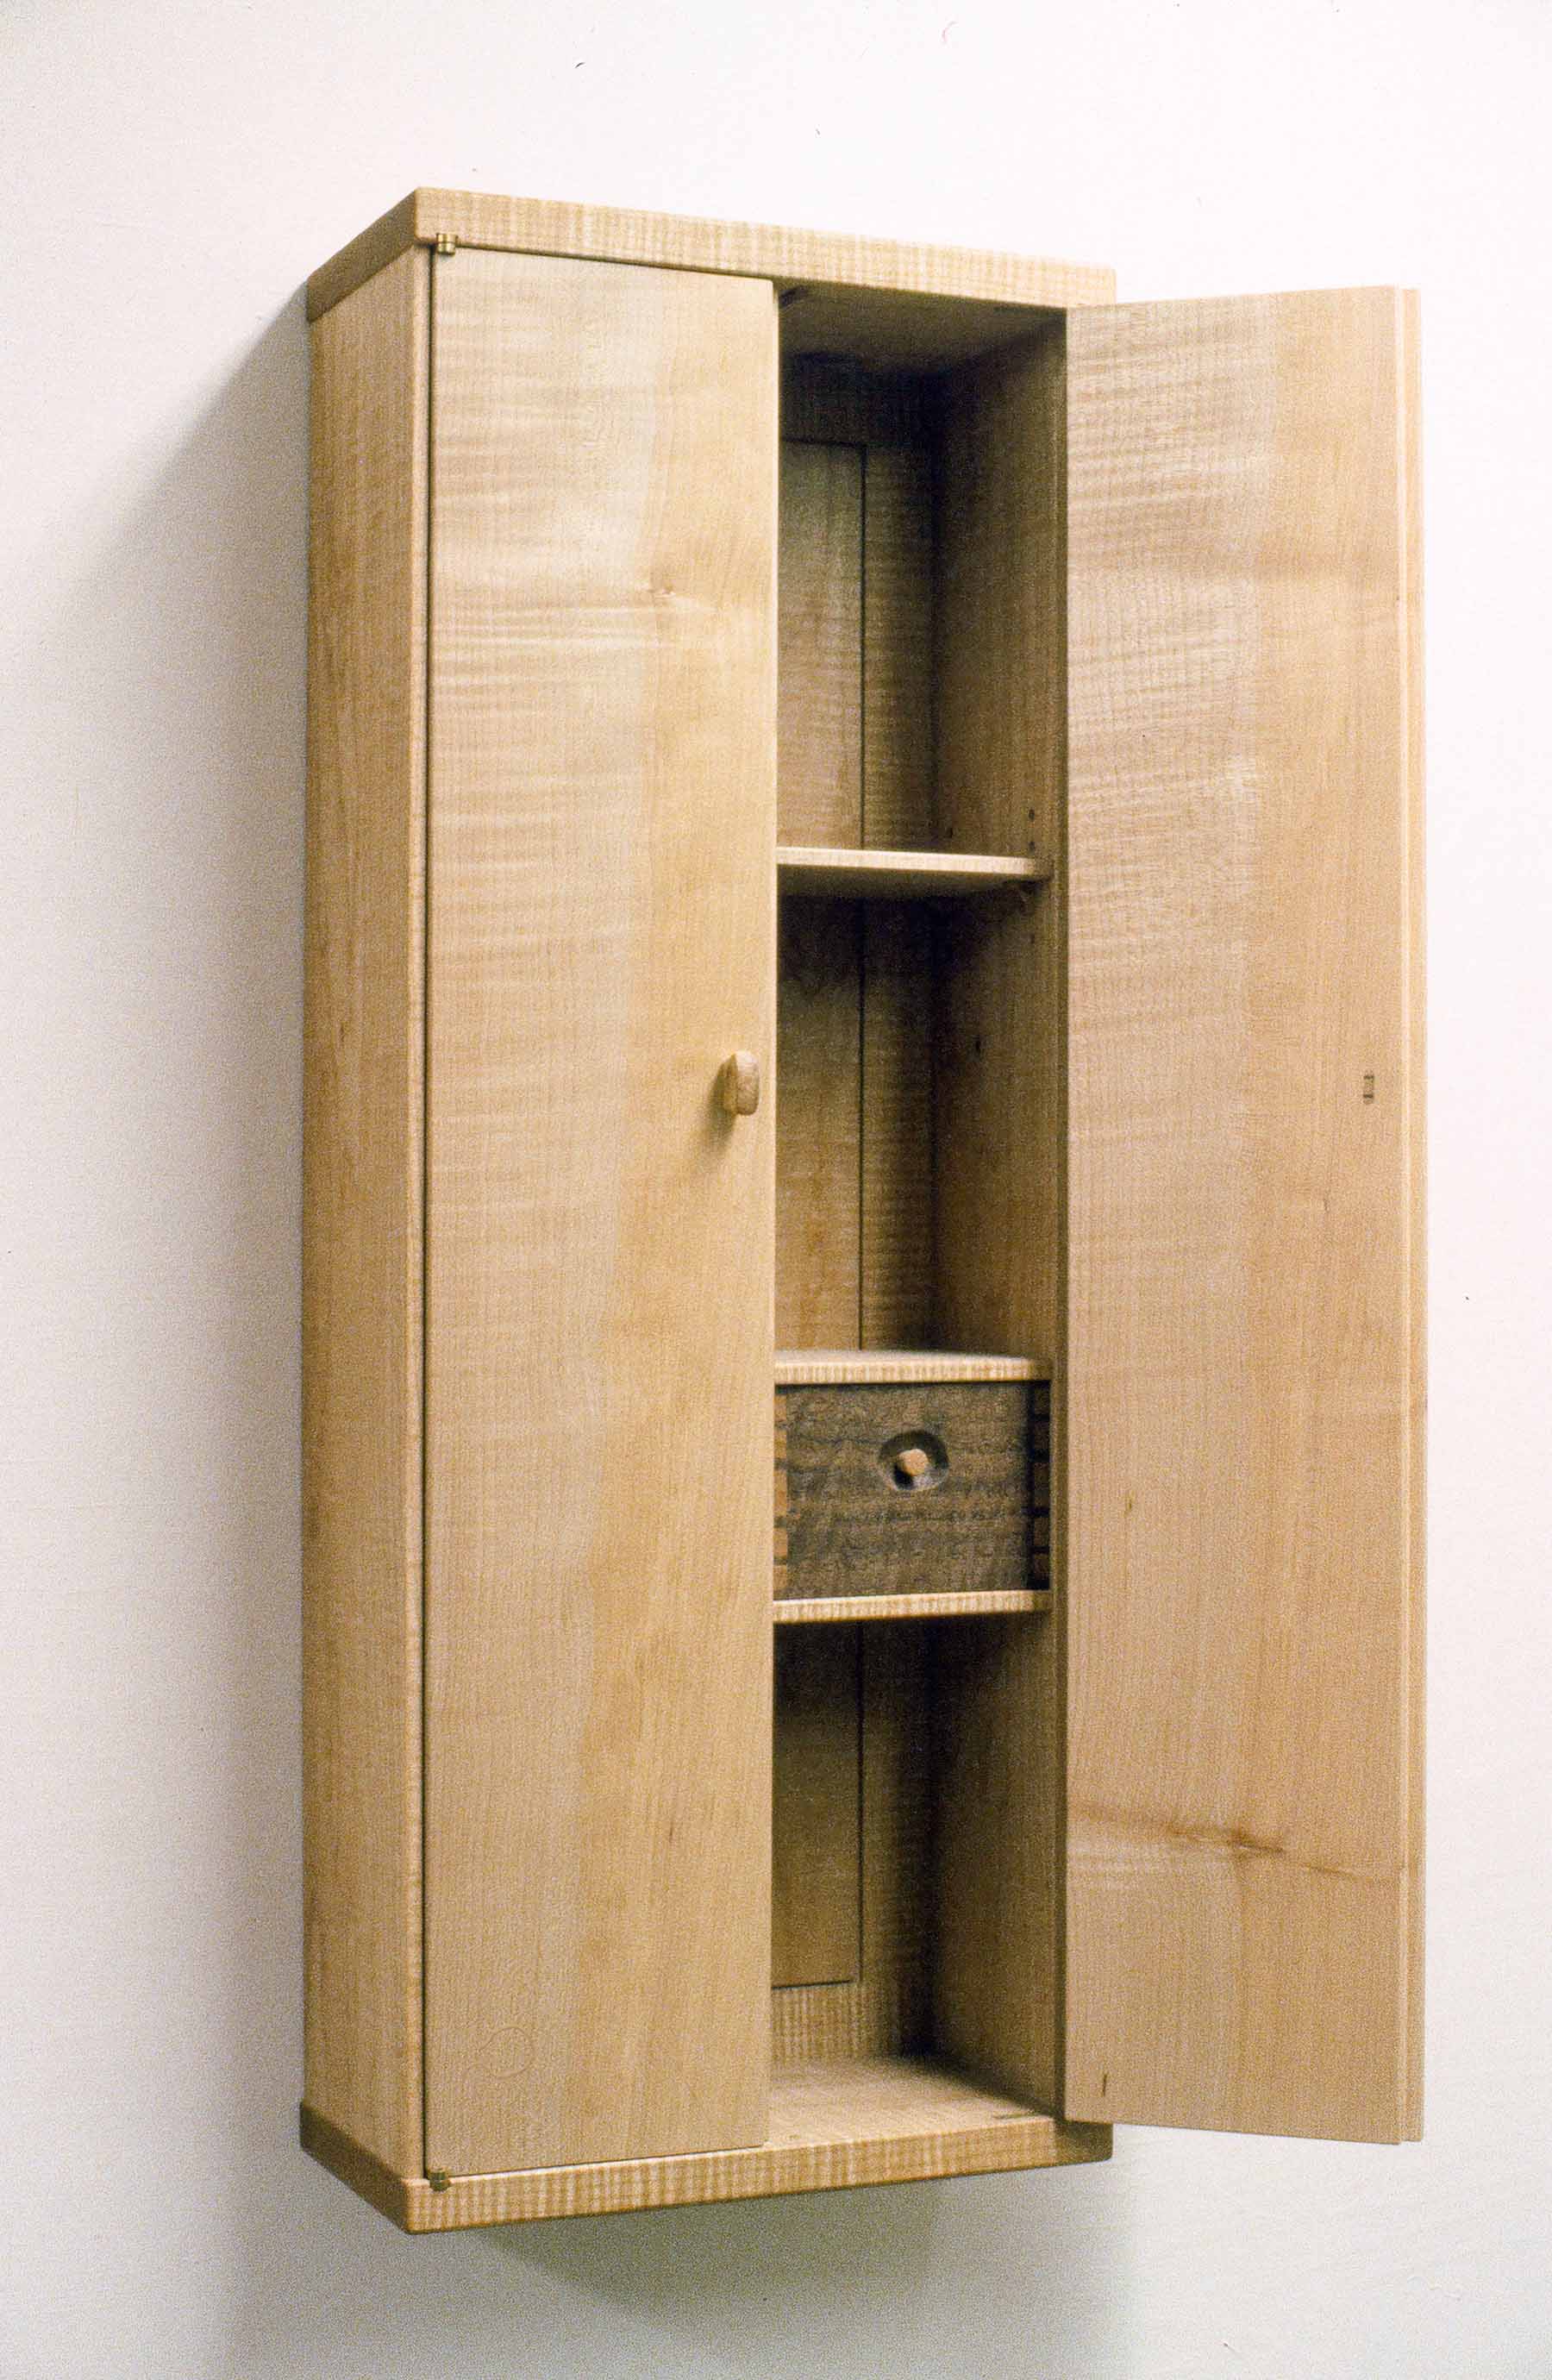 Figured Maple Wall Cabinet